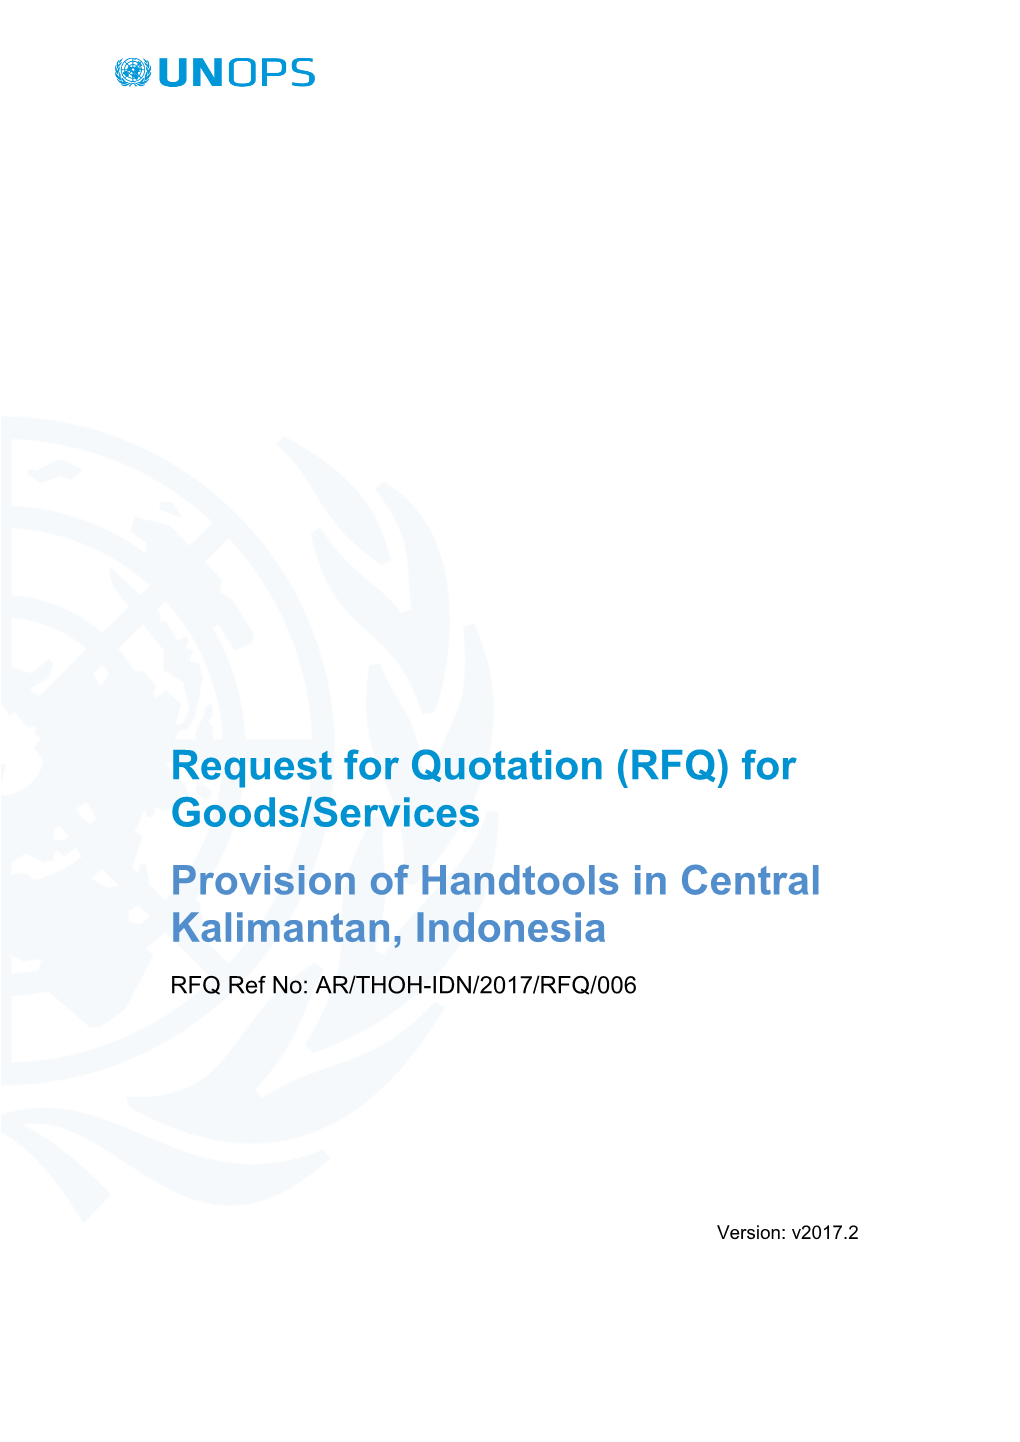 RFQ for Goods/Services